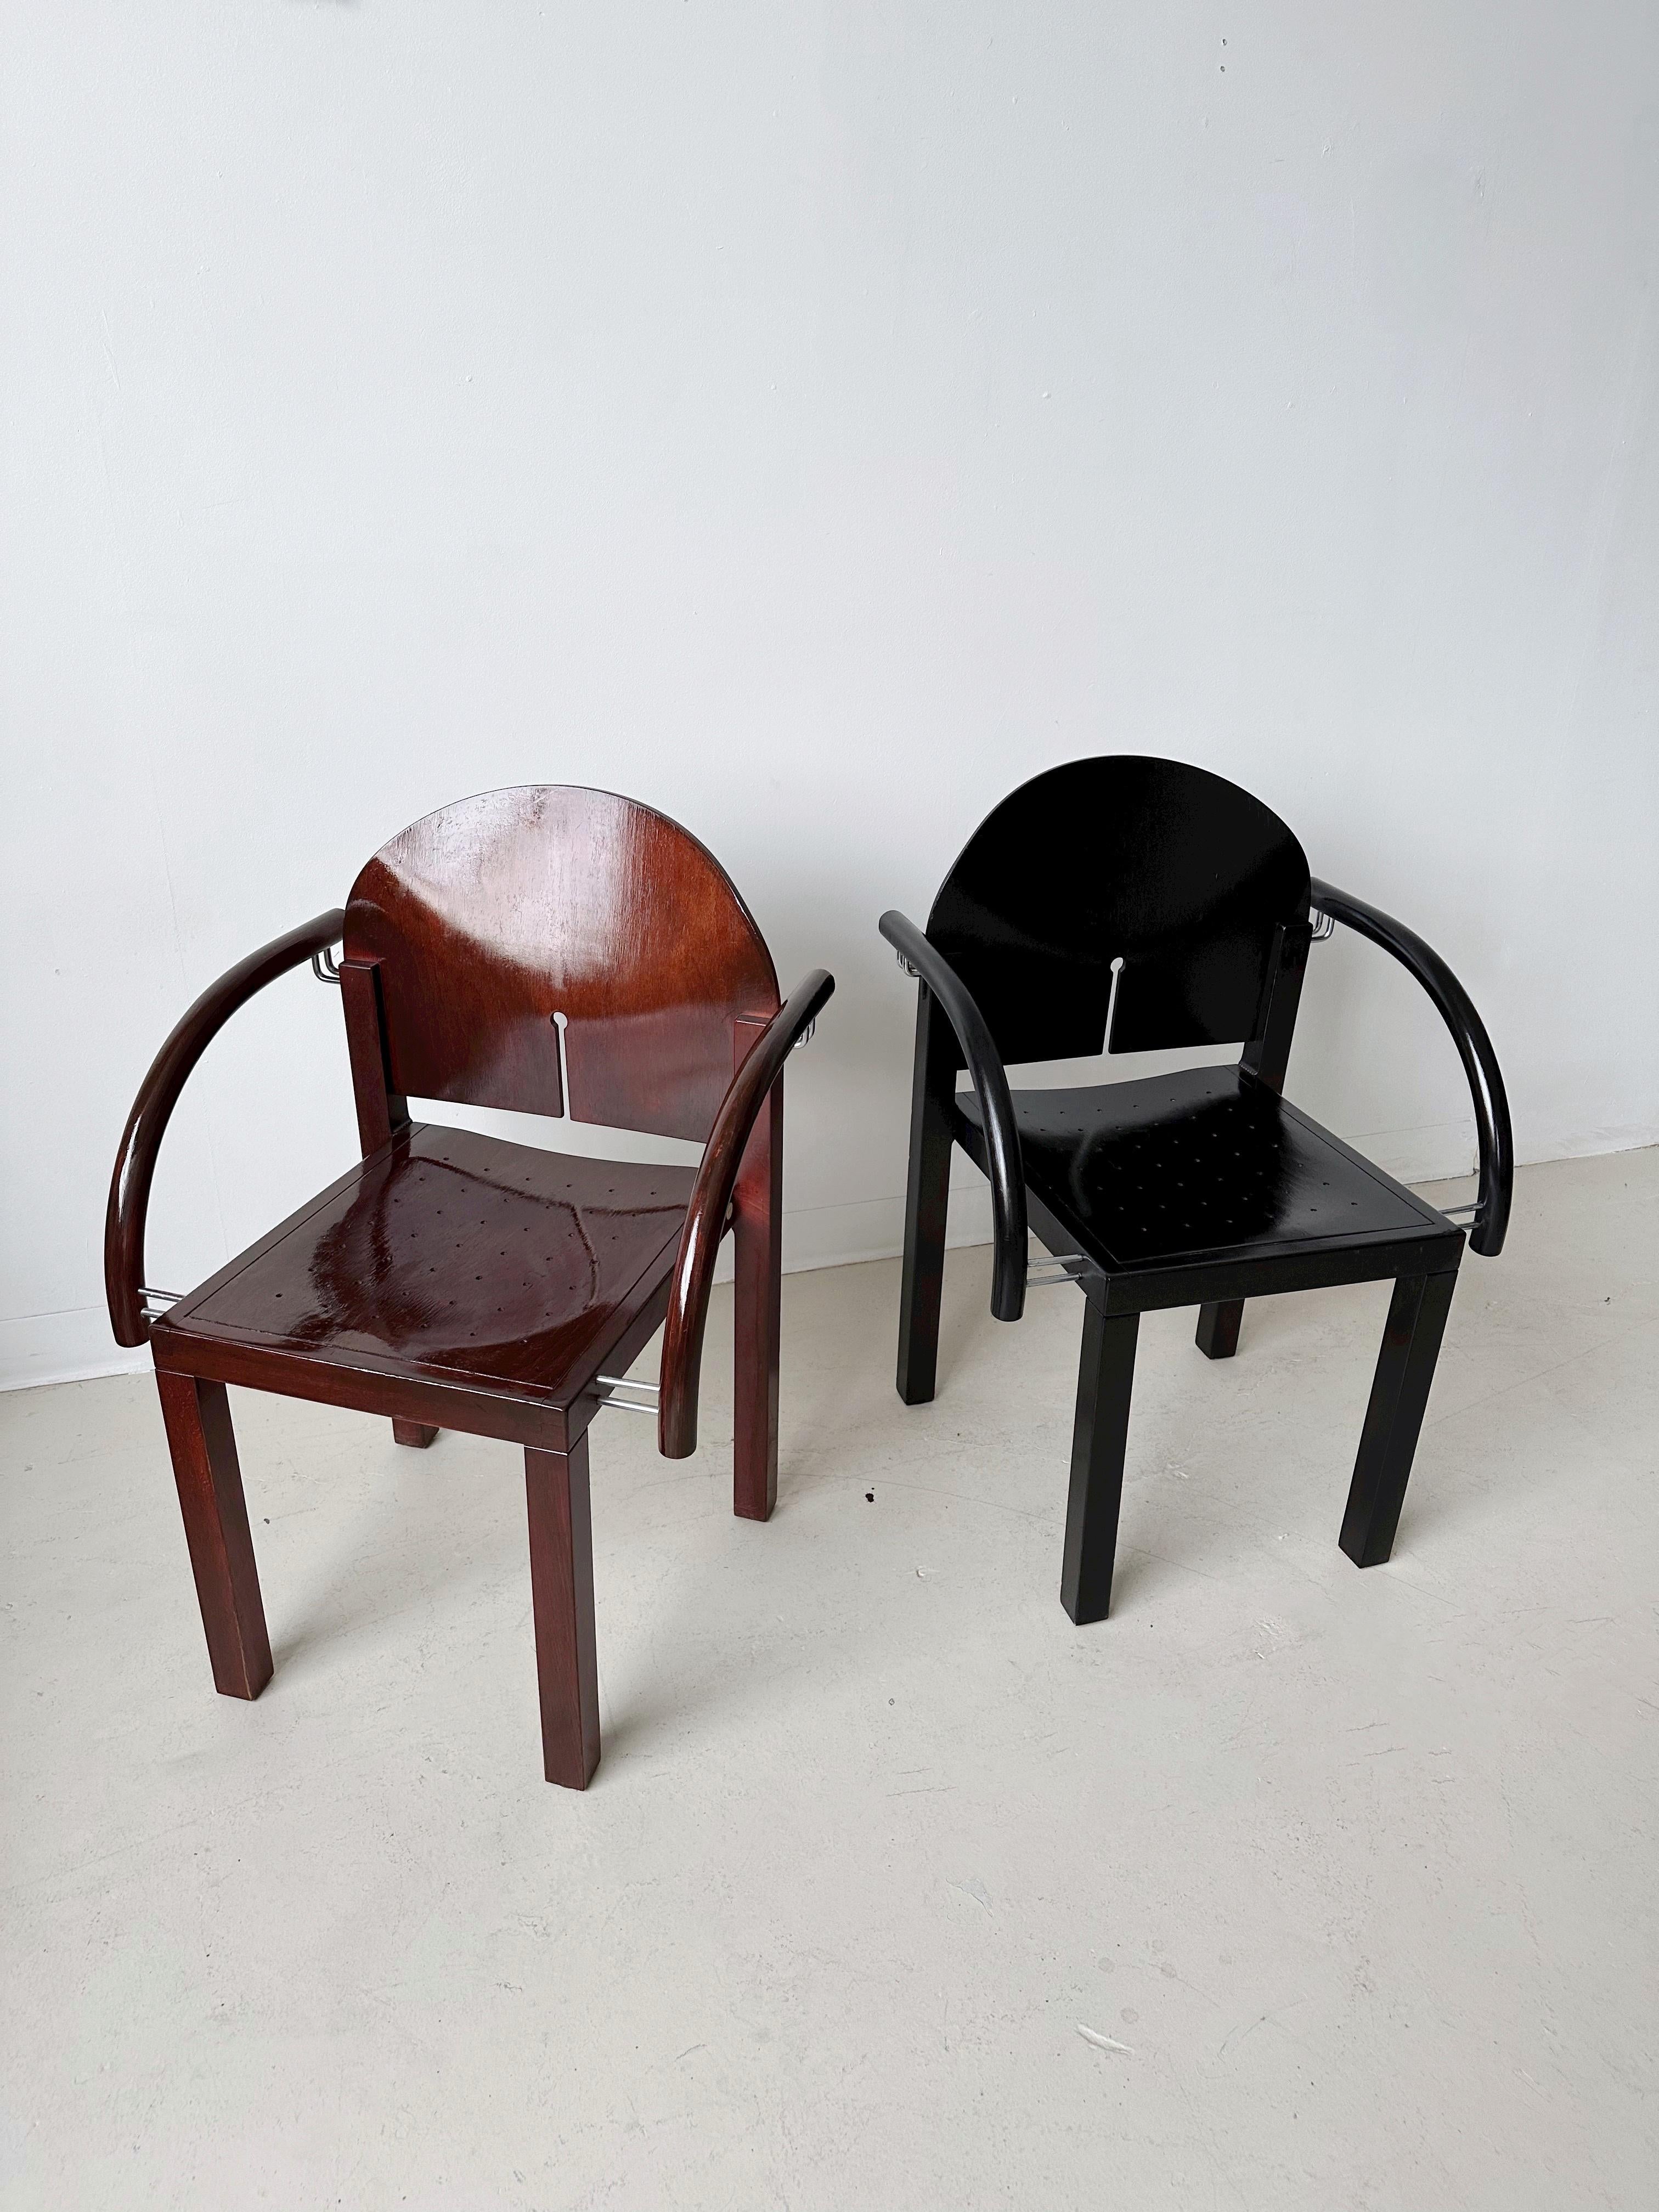 Black Side Chair Attributed to Arno Votteler for Knoll Eclipse Chair 1